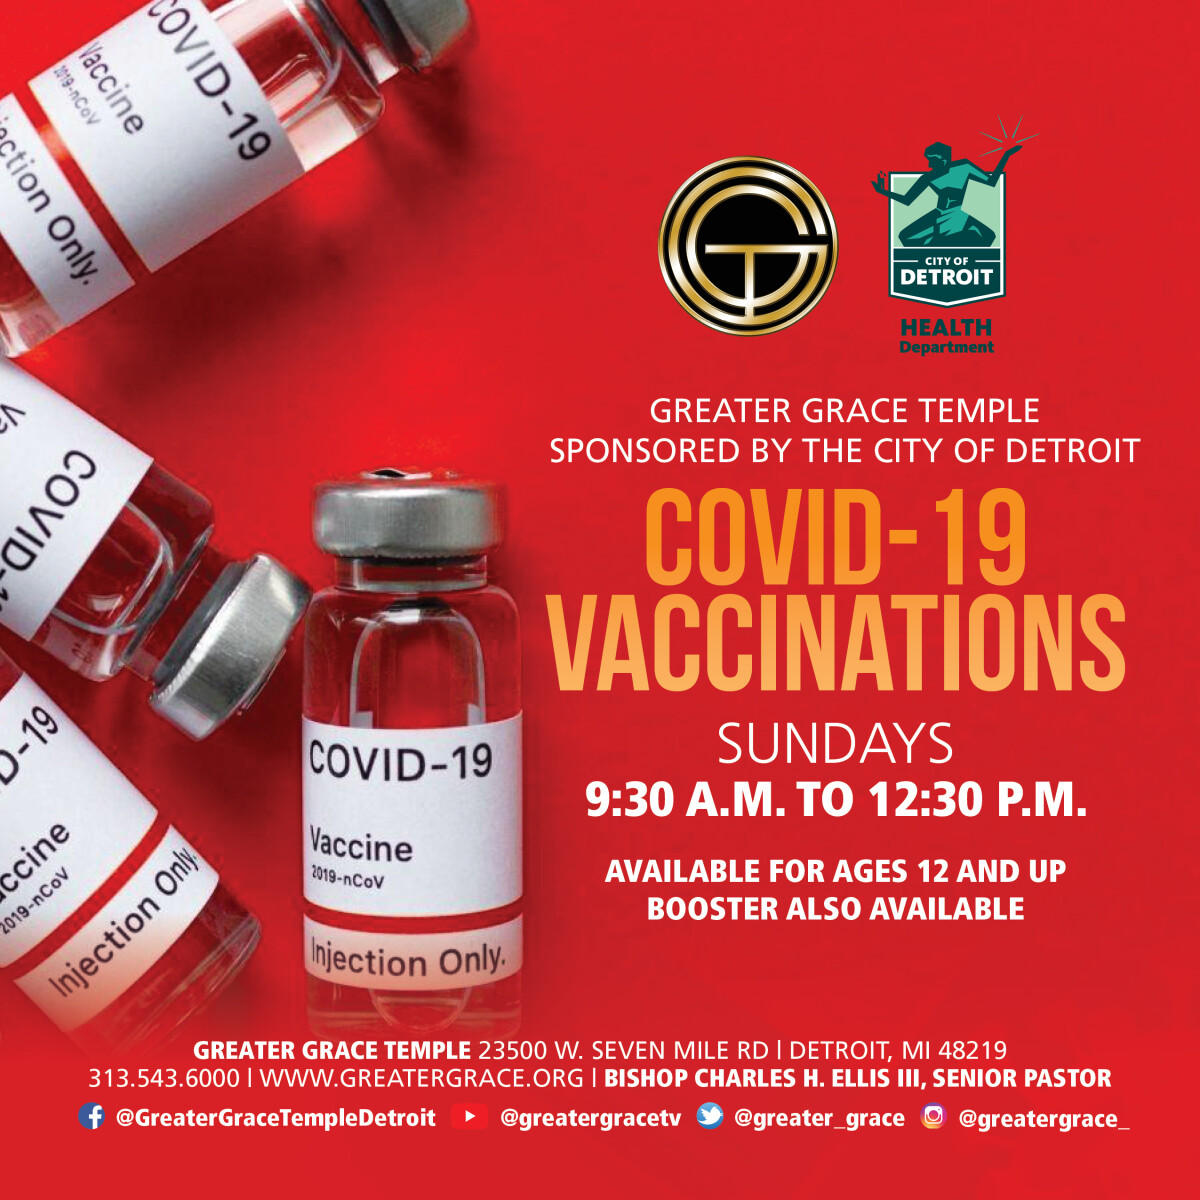 Covid-19 Vaccinations At Greater Grace